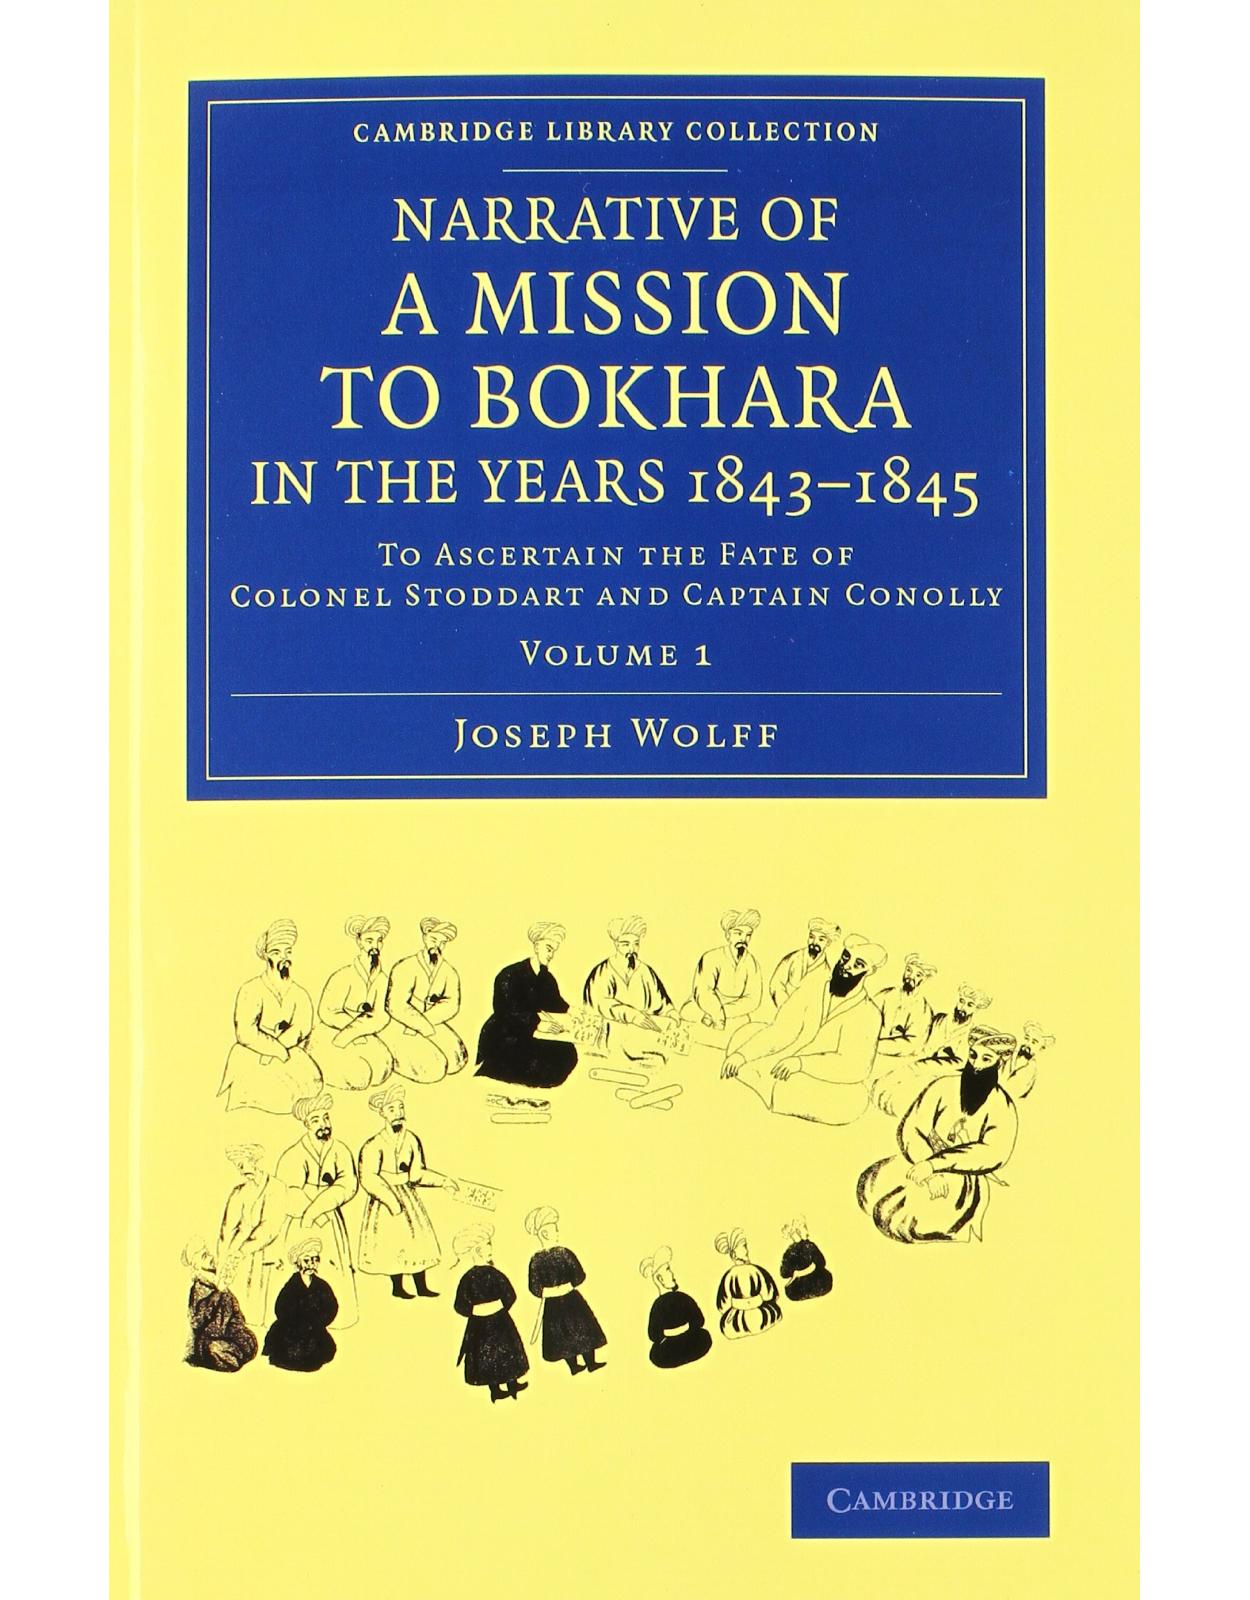 Narrative of a Mission to Bokhara, in the Years 1843-1845 2 Volume Set: To Ascertain the Fate of Colonel Stoddart and Captain Conolly (Cambridge Library Collection - South Asian History) 